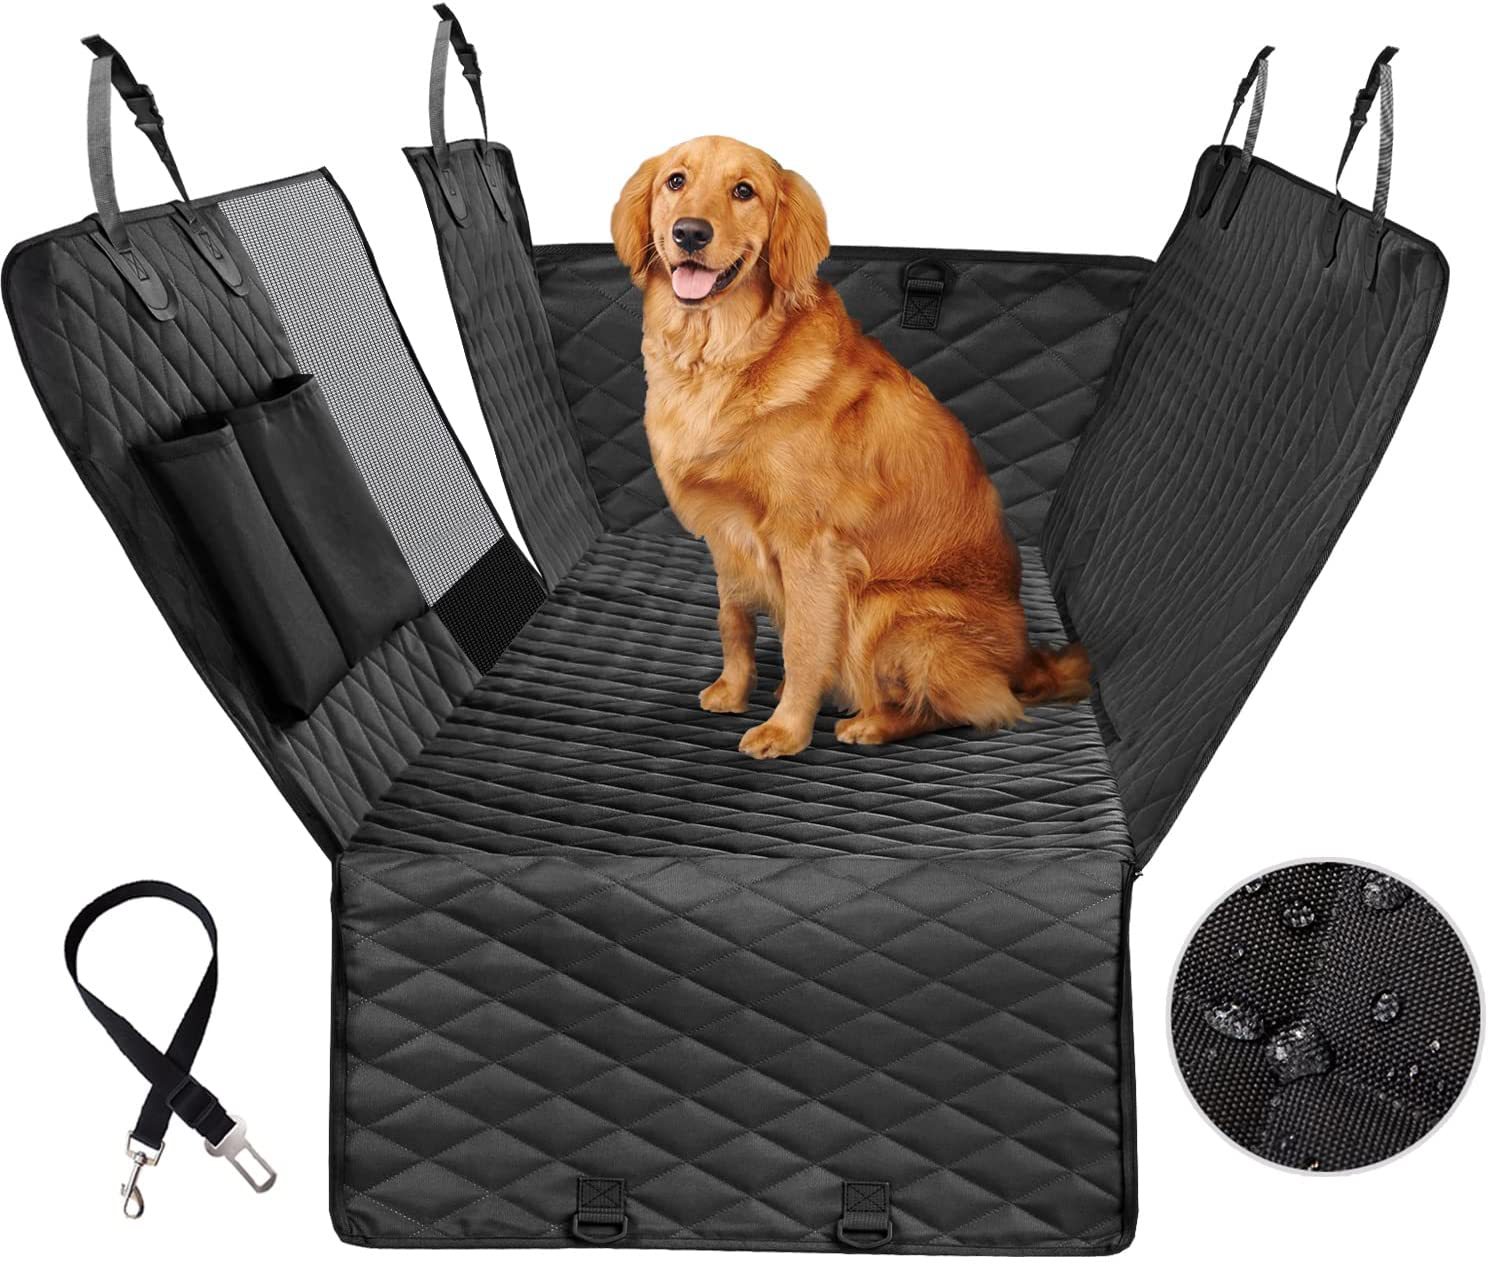 Hot-selling Winter Foldable Waterproof High Quality Durable Pet Dog Car Seat Protector Cover Hammock Mat